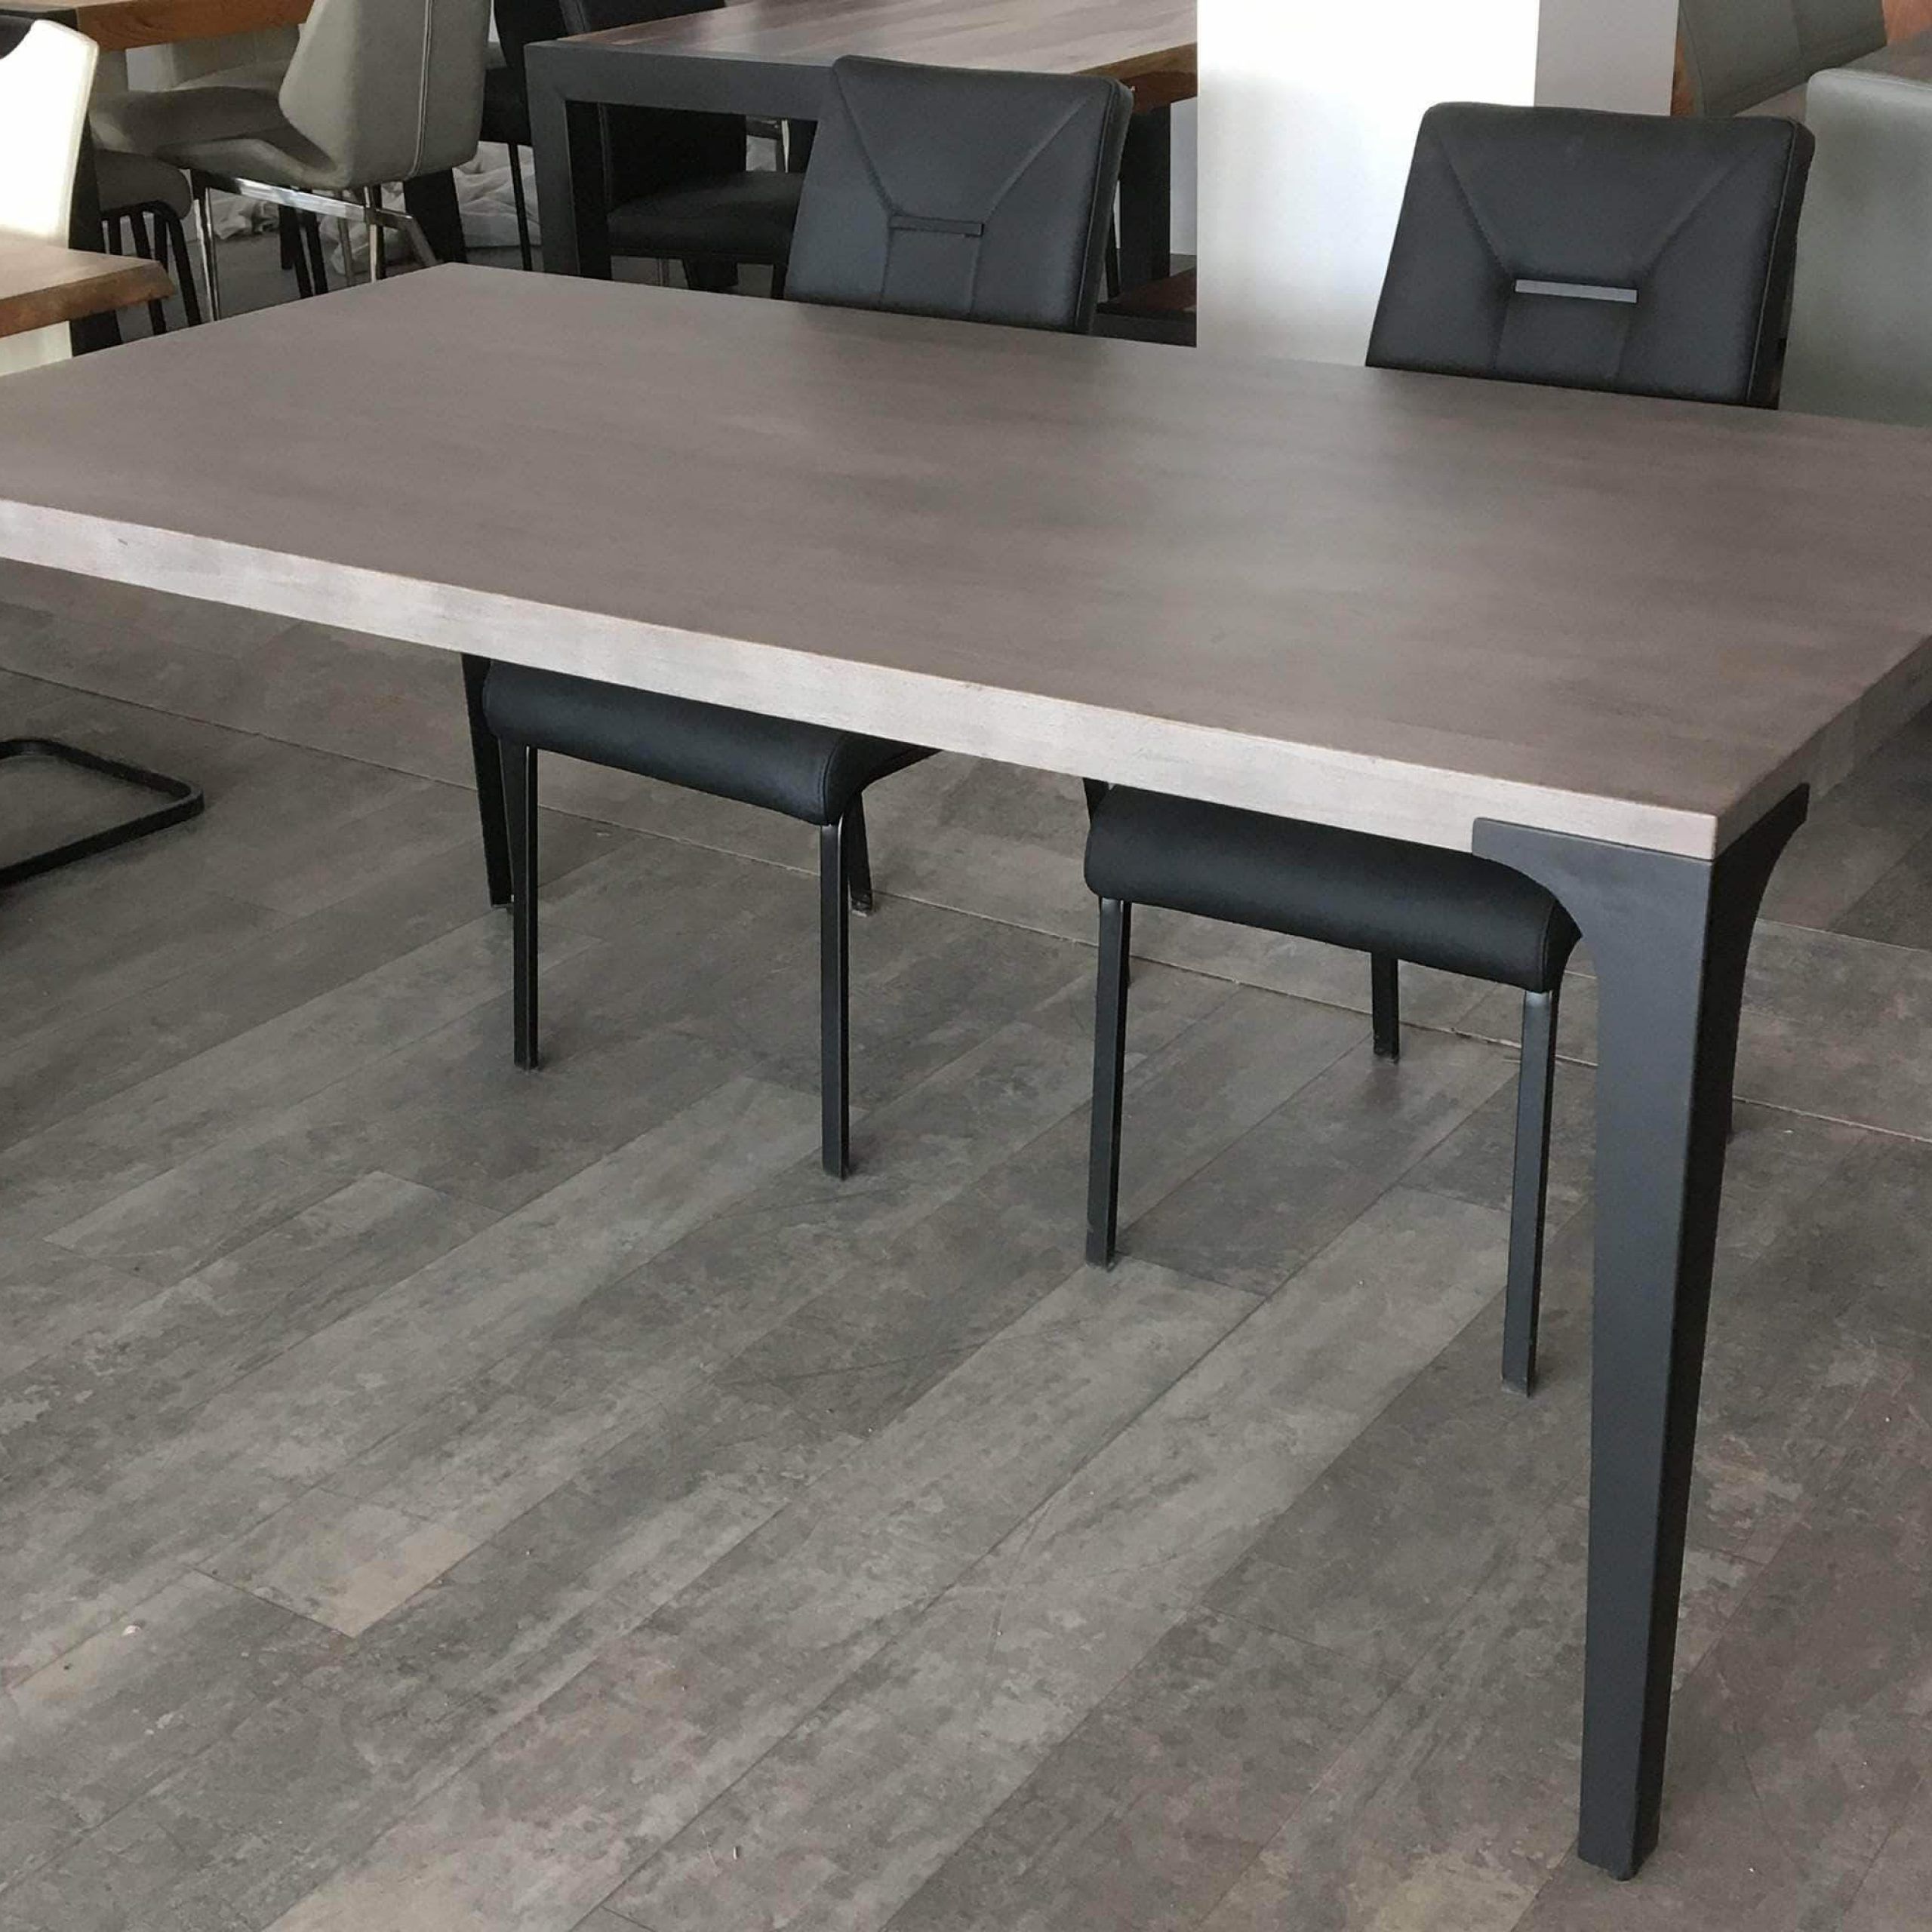 Widely Used Acacia Dining Tables With Black X Legs In Wholesale Furniture Brokers: 😍 Live Edge, Solid Wood Dining (View 23 of 30)